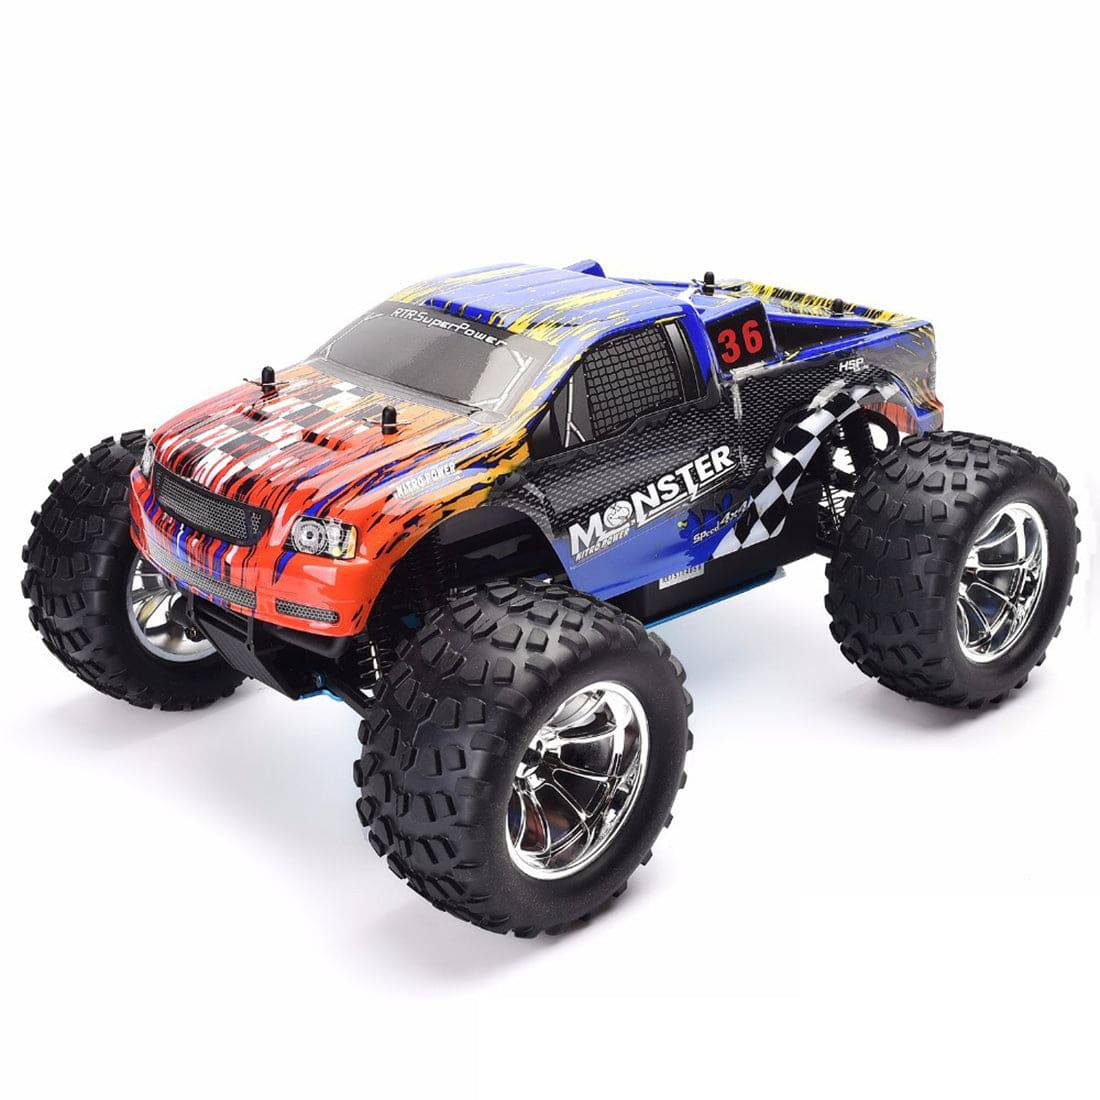 HSP 94188 1/10 RC Remote Control Nitro Gas Powered Monster Truck 4WD W/VX18 Engine 2